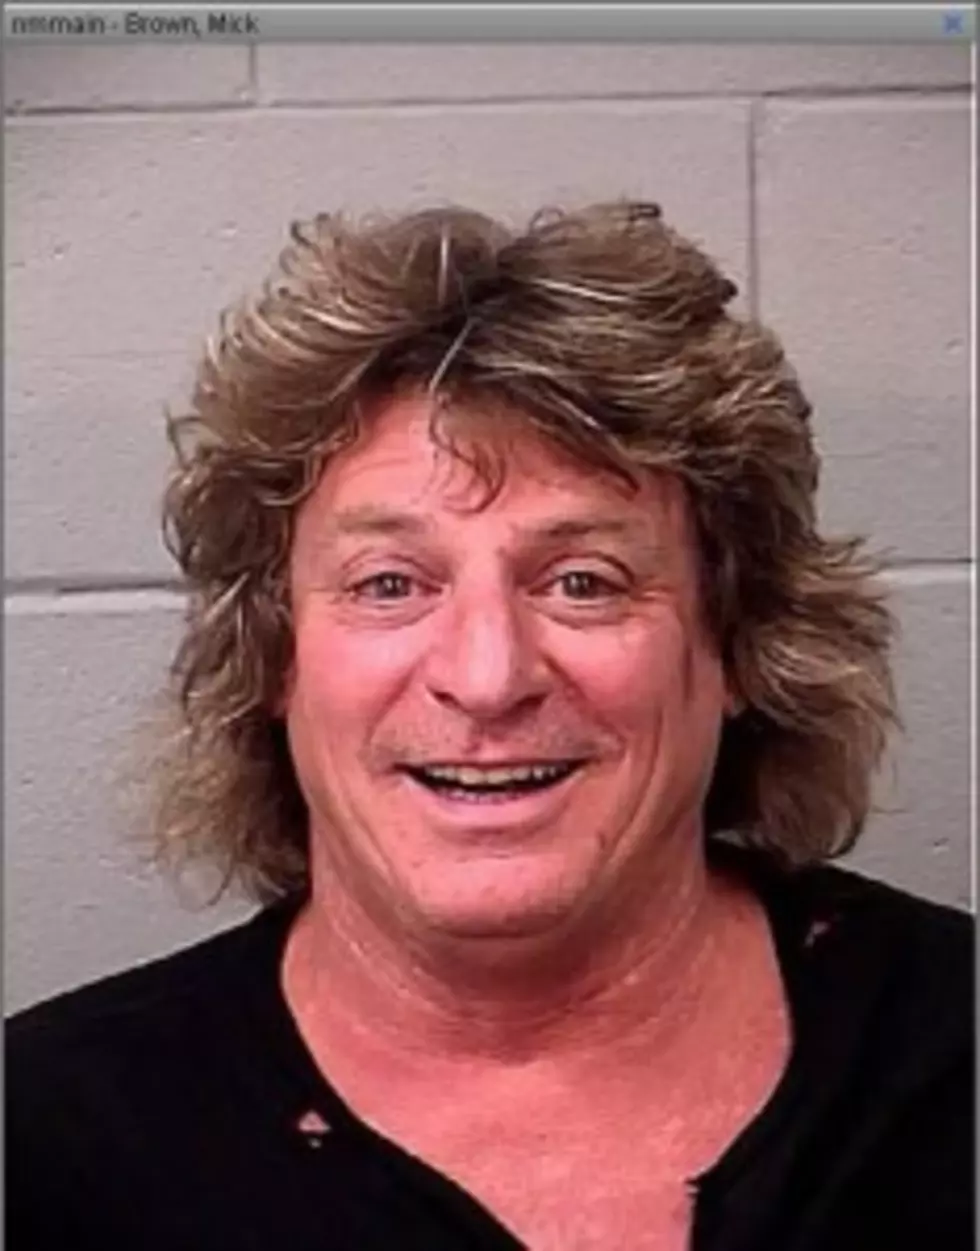 Ted Nugent Drummer Pleads Not Guilty to Golf Cart DUI and Three Other Misdemeanor Charges